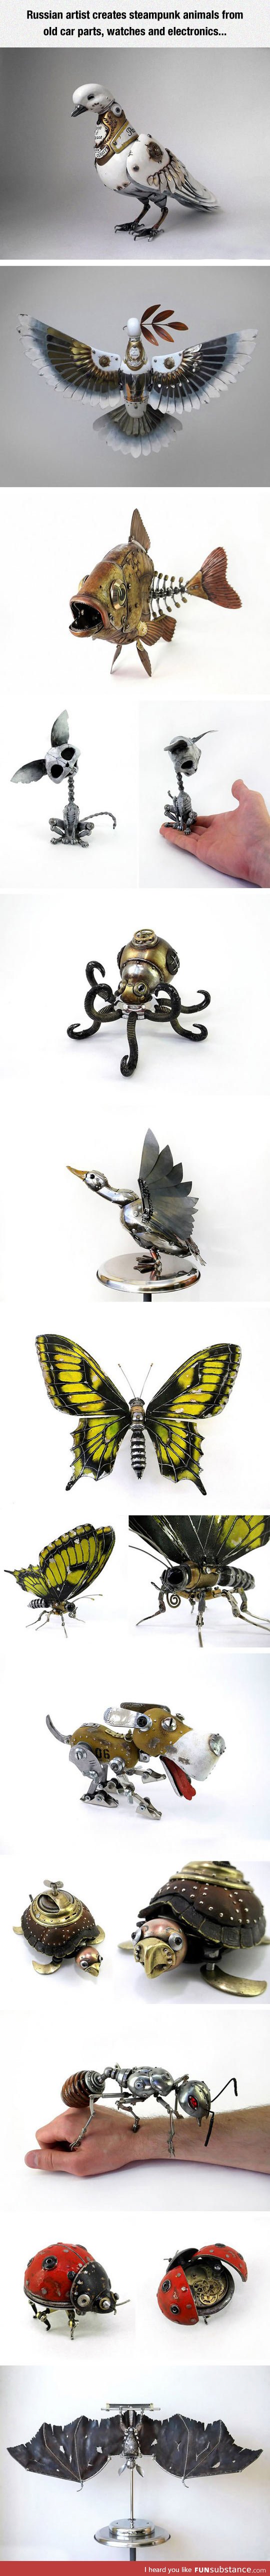 Steampunk animals from old car parts